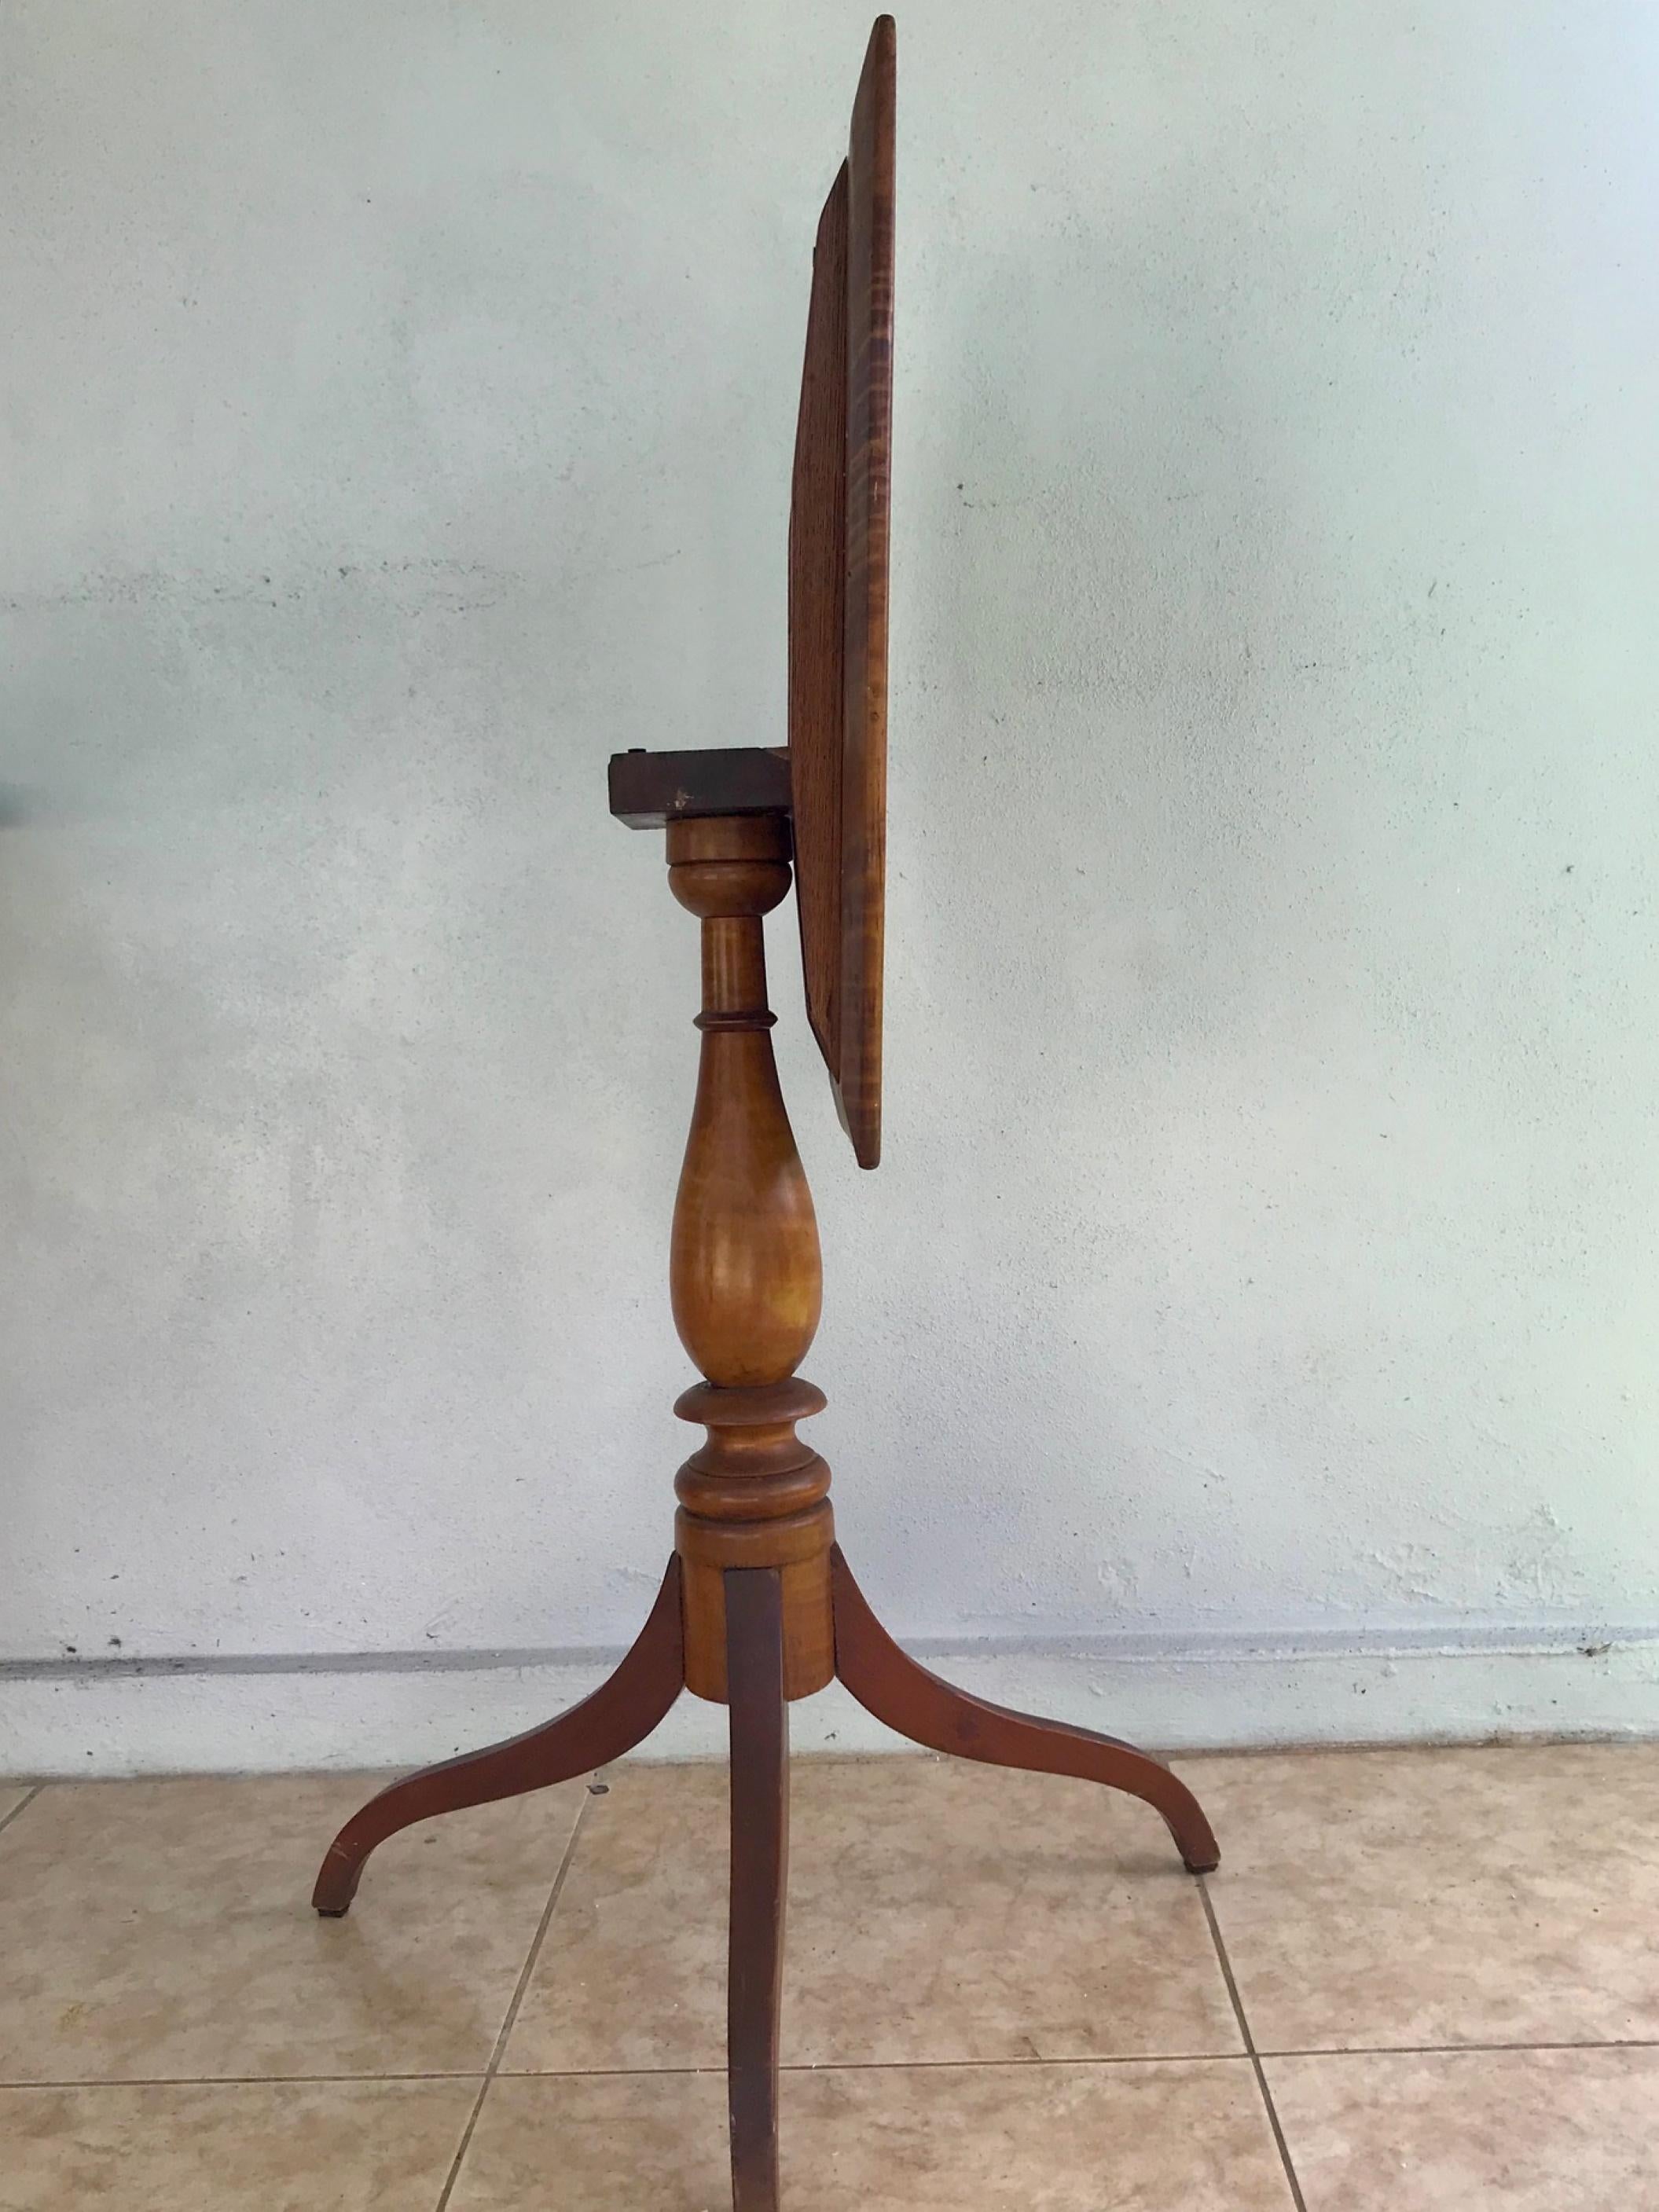 19th Century New England Tilt-Top Tripod Table In Good Condition For Sale In Vero Beach, FL